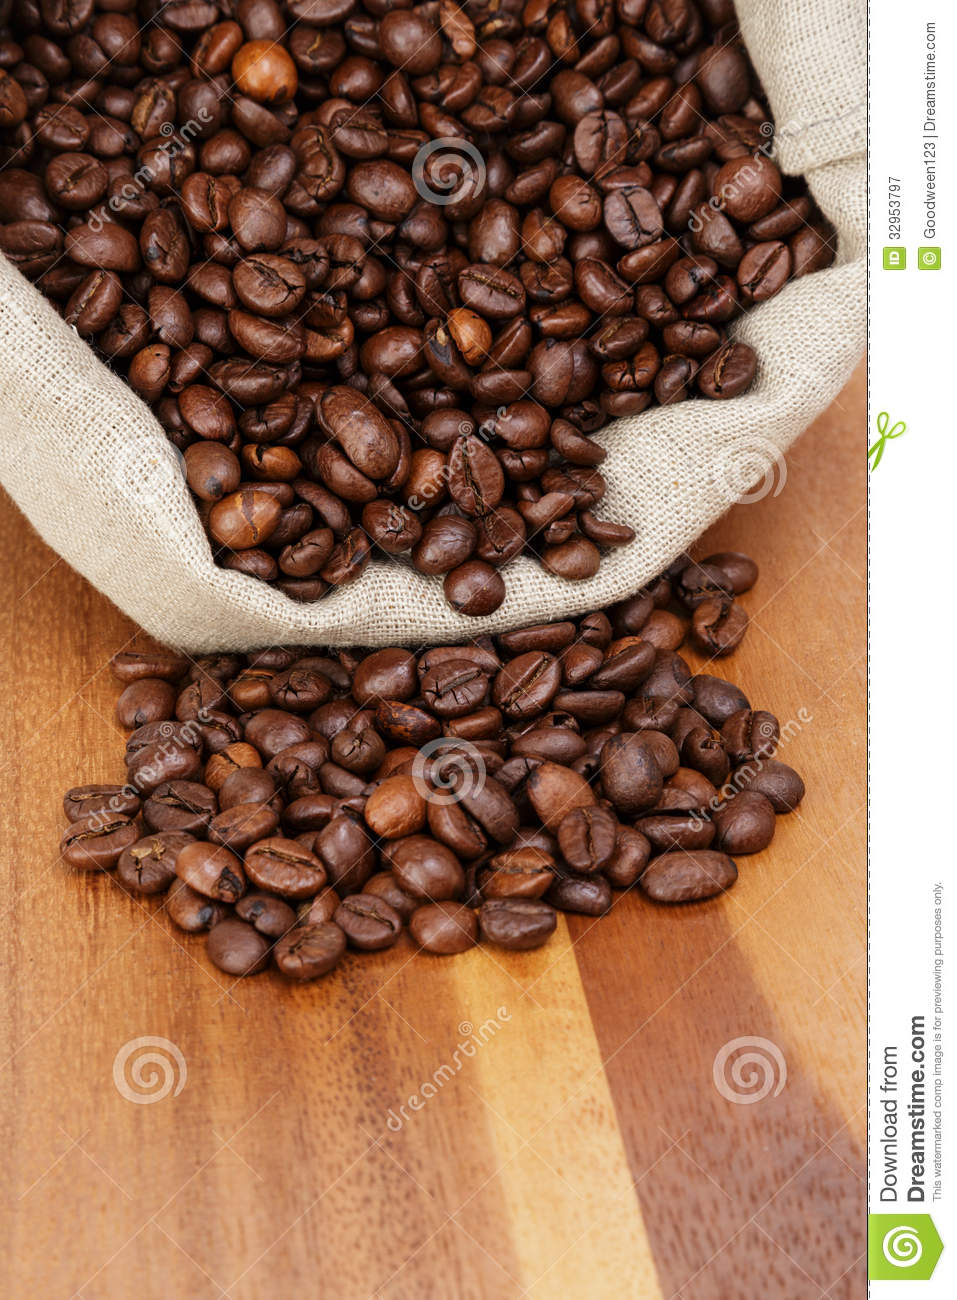 Roated Coffee Beans Spill Out Of The Bag Royalty Free Stock